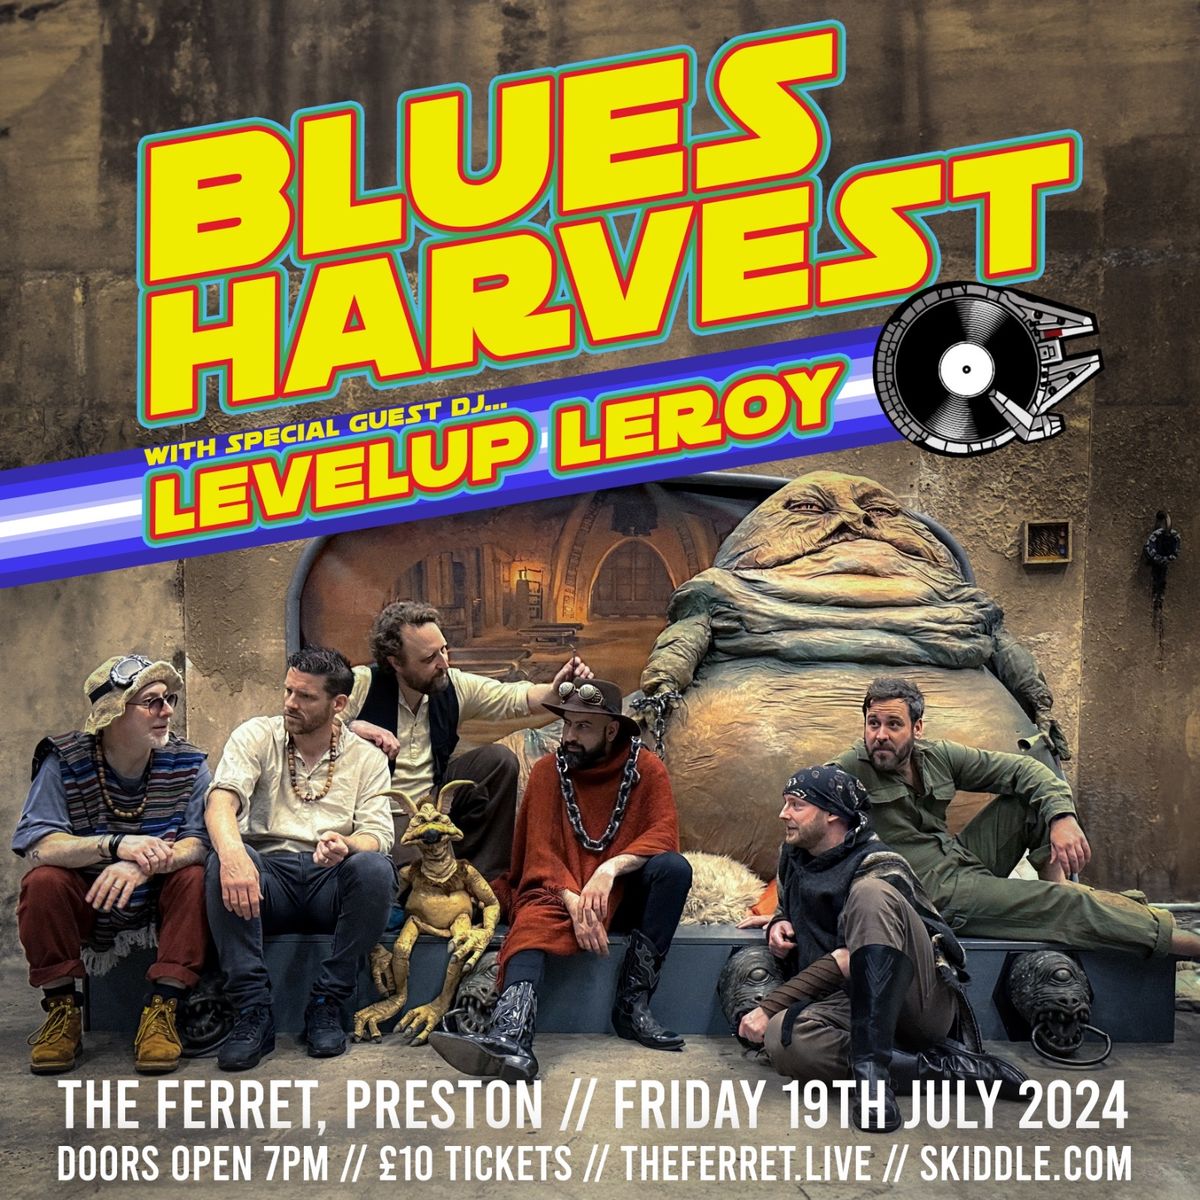 Blues Harvest with special guest DJ: LevelUpLeroy | The Ferret, Preston - 19.07.24